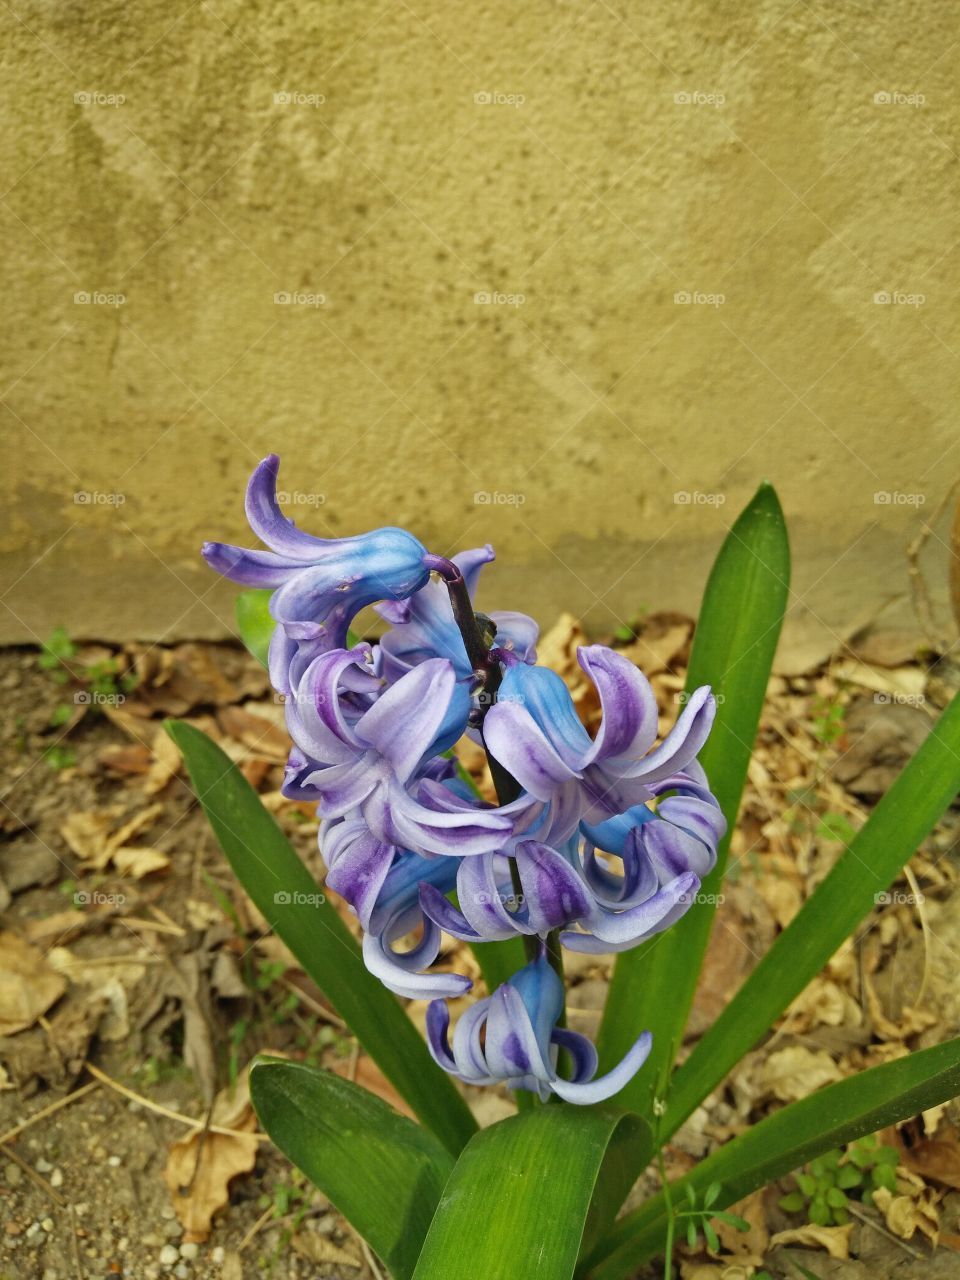 a colorful purple hyacinth flower in bloom in springtime in a garden